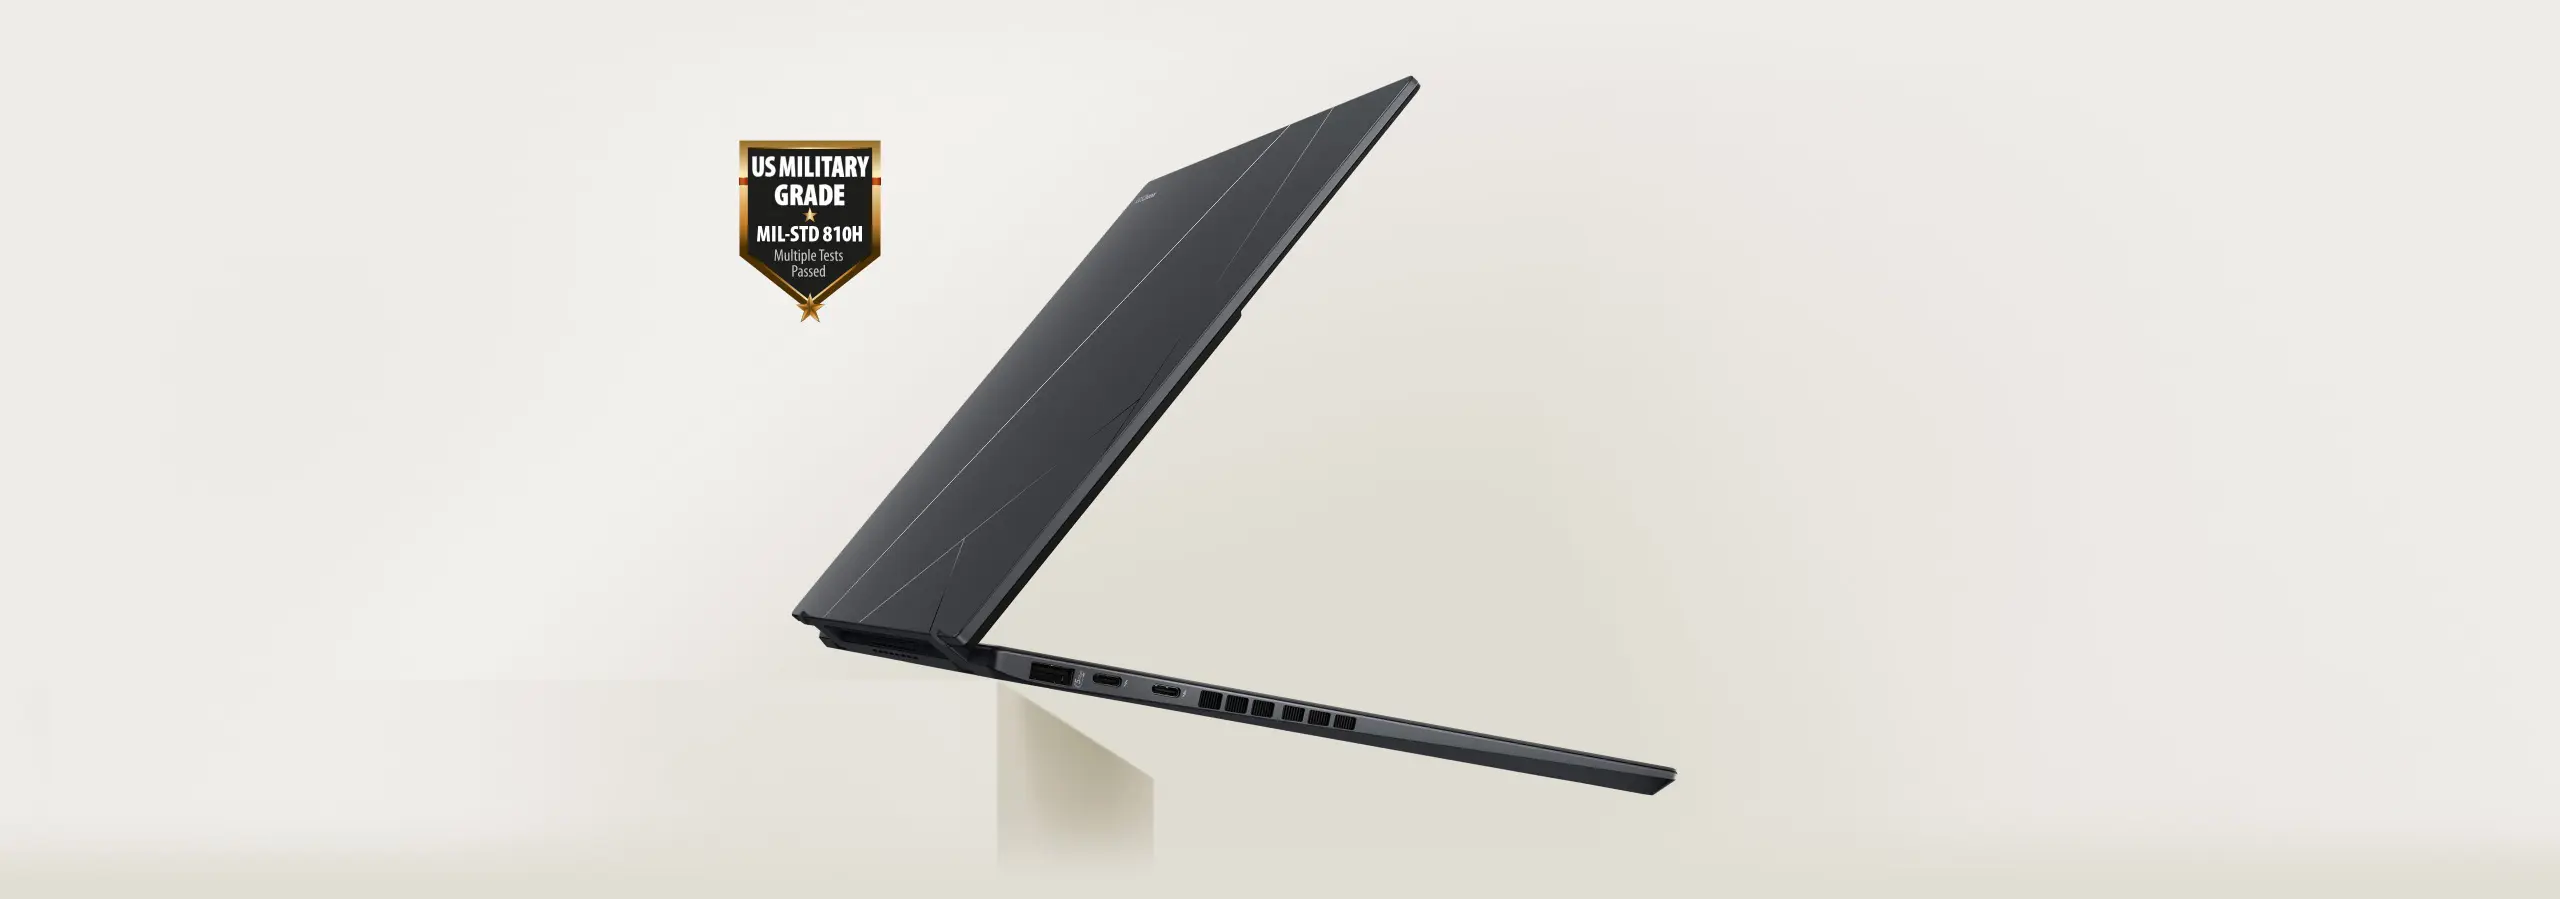 Zenbook DUO laptop is floating in mid-air with US military garde laptop durability icon next to it.